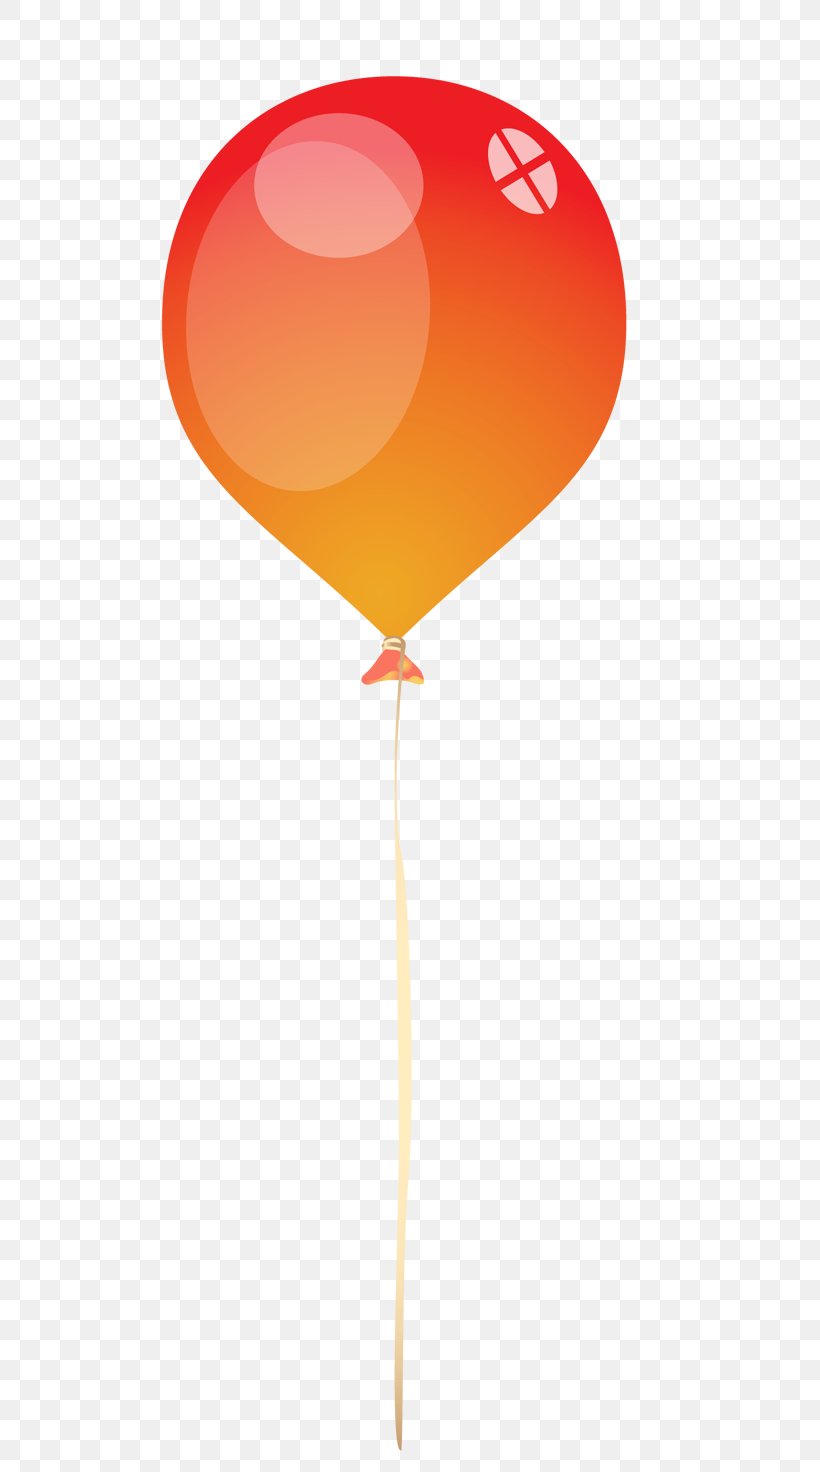 Toy Balloon Photography Clip Art, PNG, 522x1472px, Toy Balloon, Balloon, Creativity, Holiday, Orange Download Free